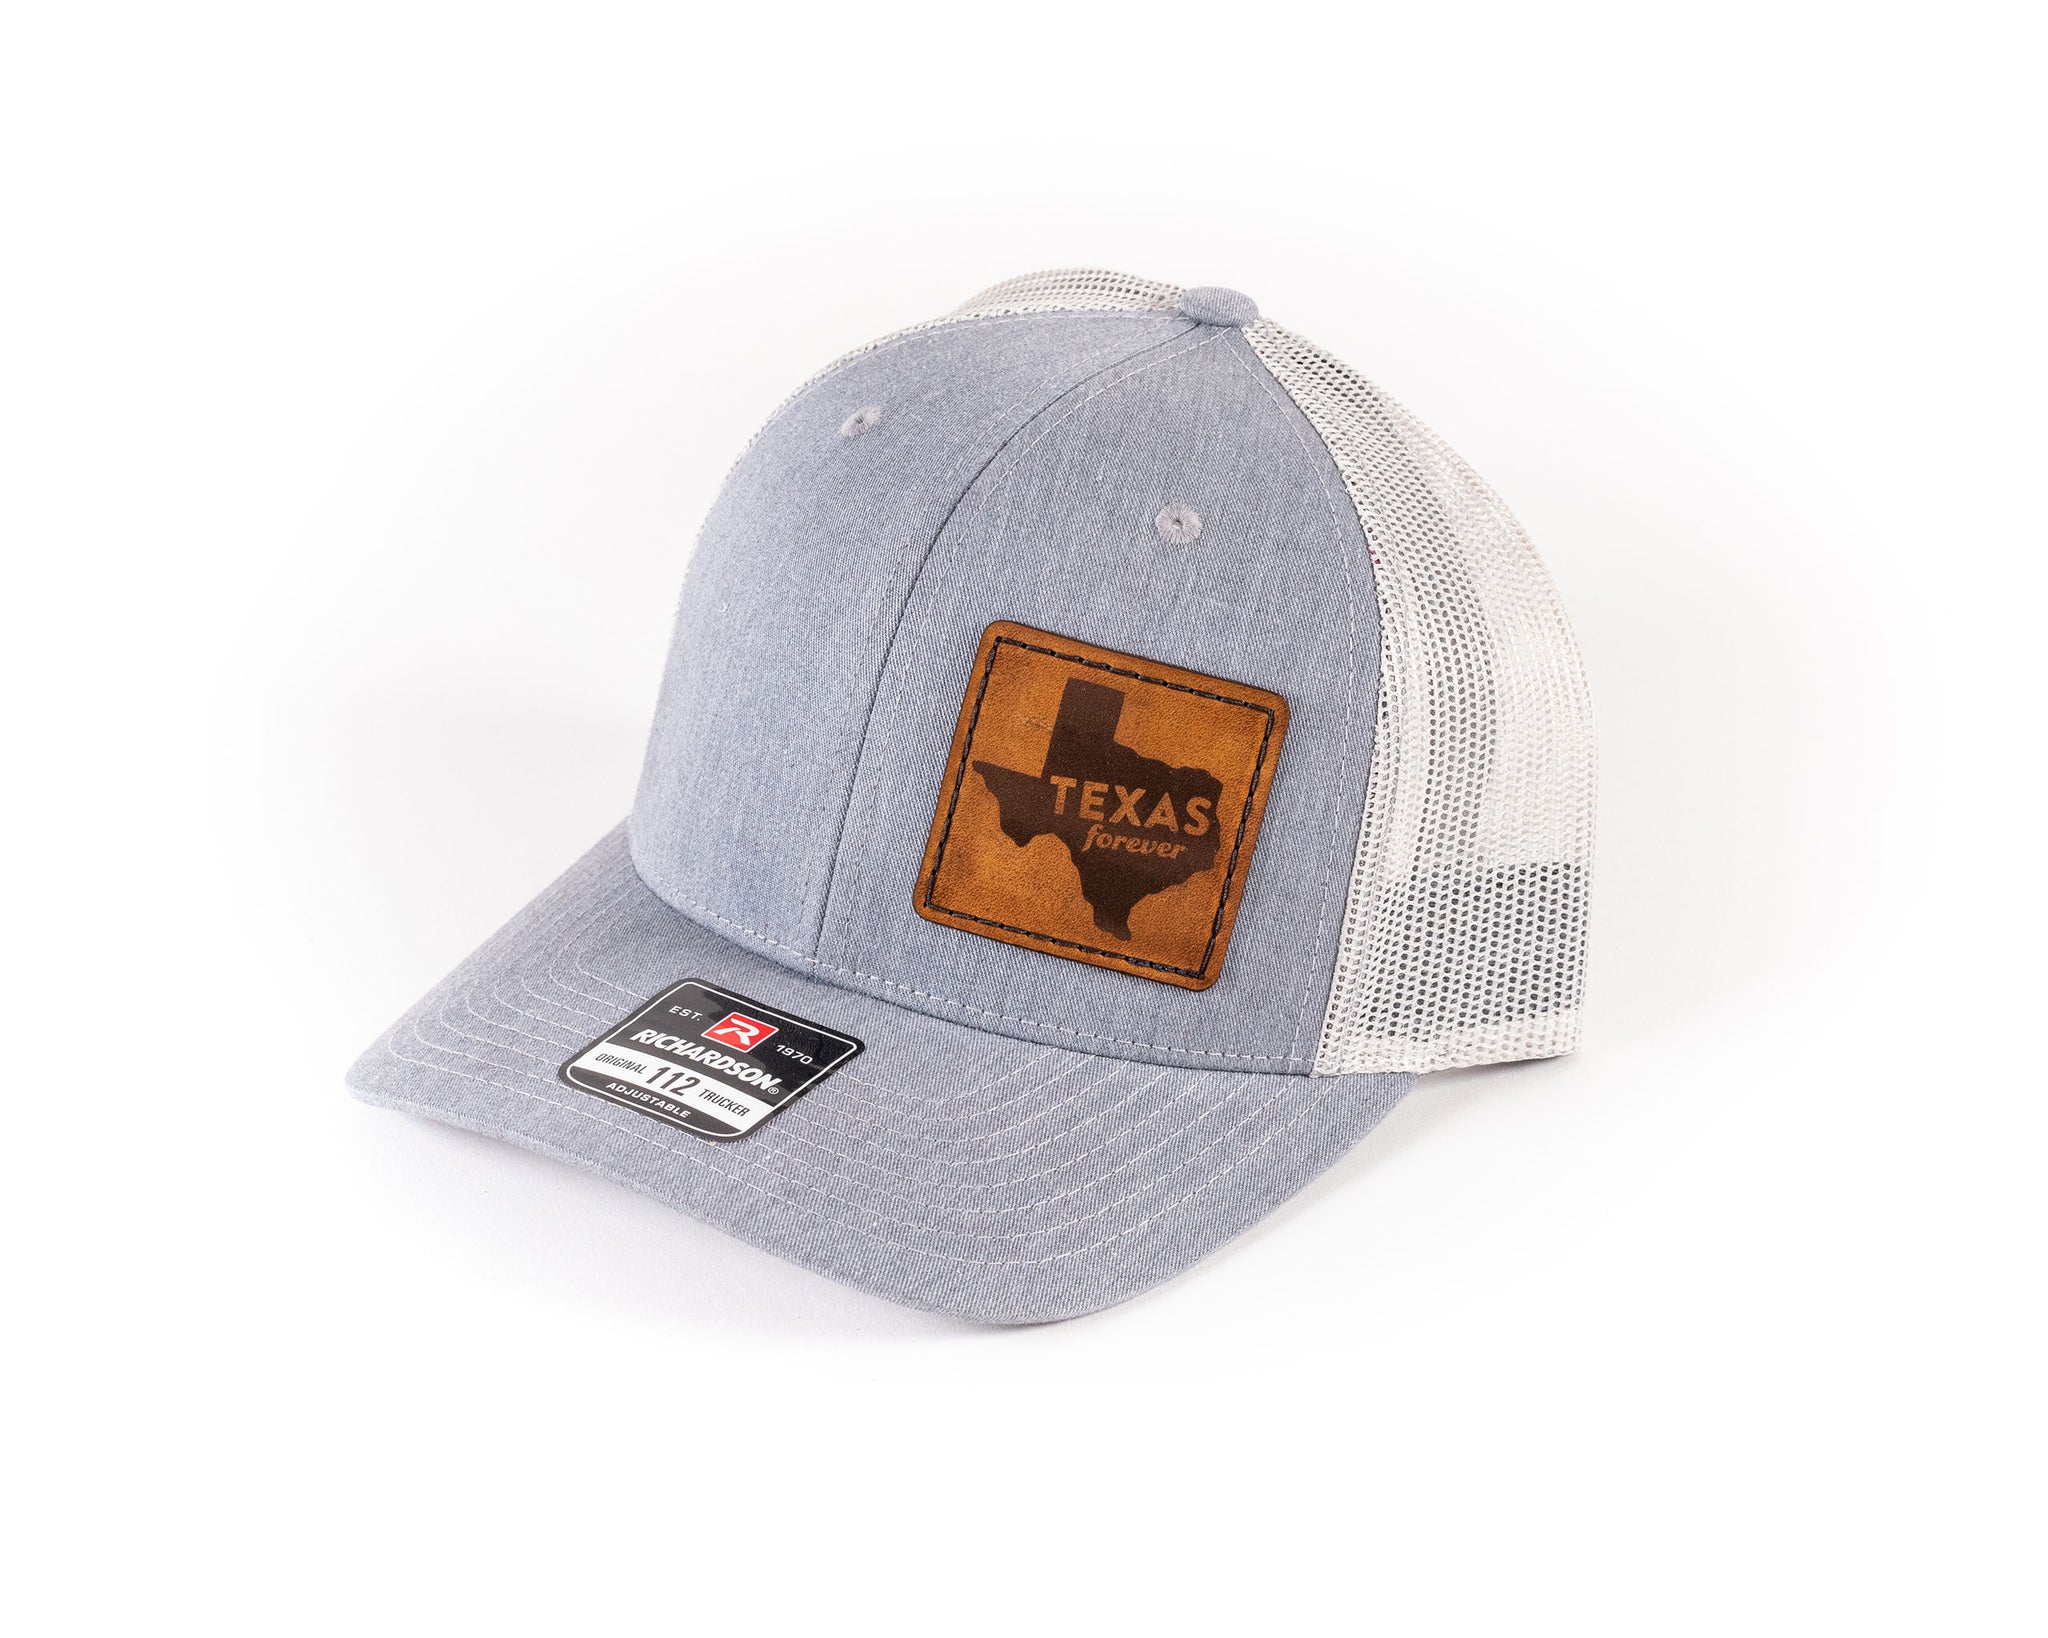 Texas Forever Hat with Leather Patch